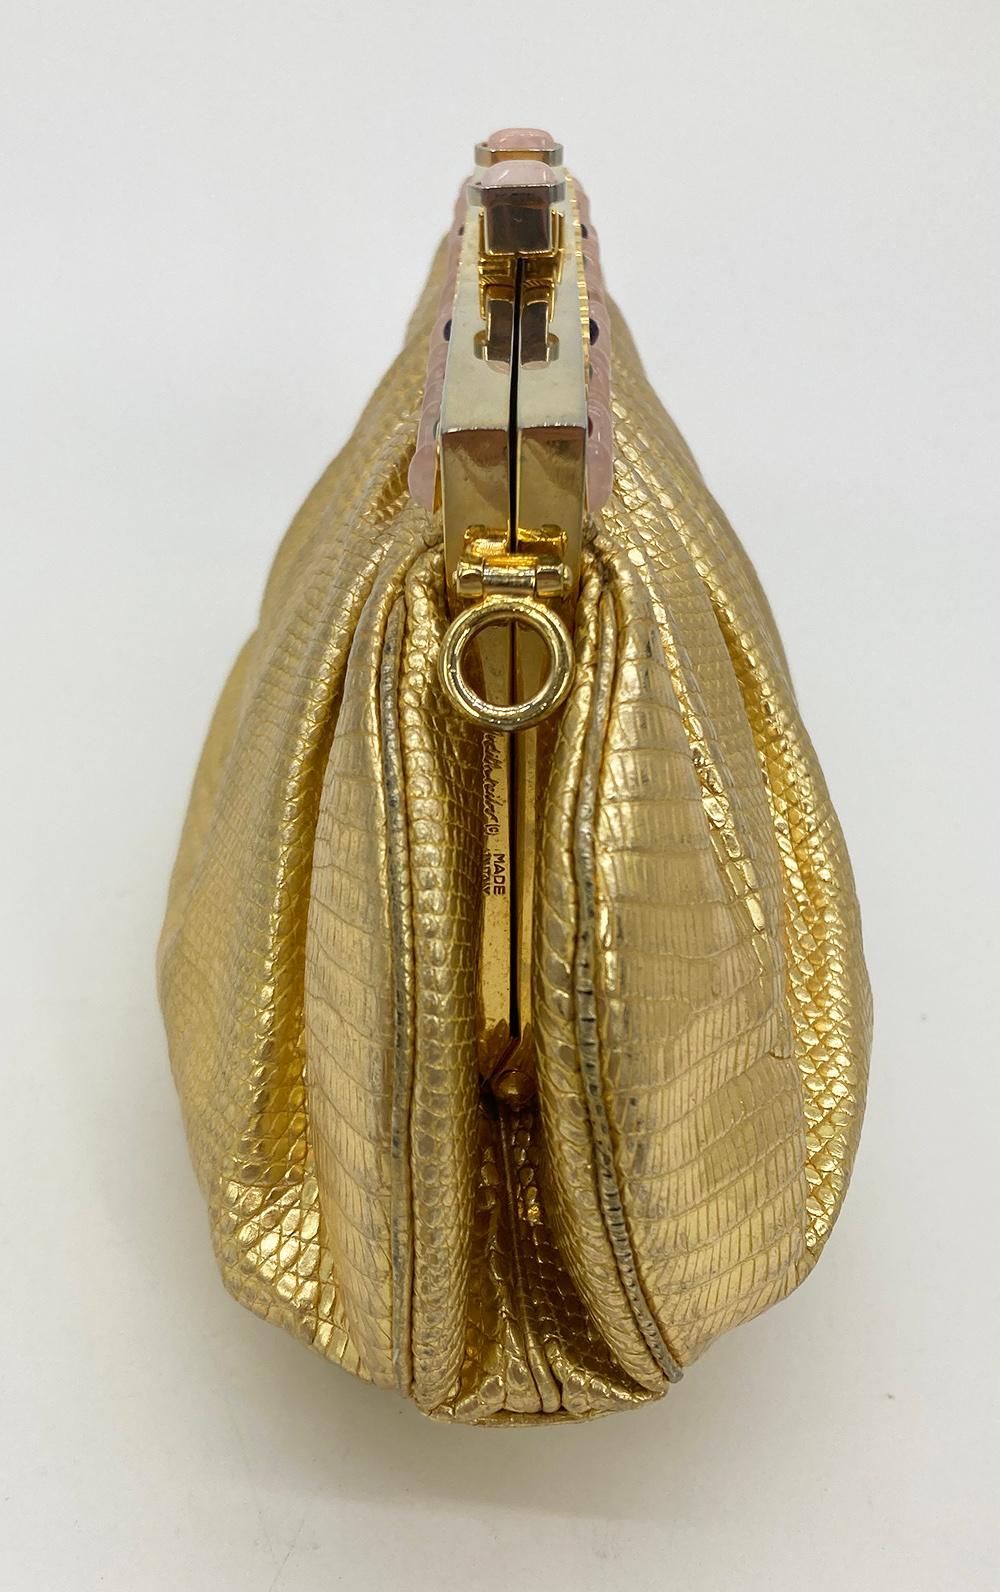 Judith Leiber Gold Lizard Gemstone Clutch in good condition. Gold lizard trimmed with gold hardware, rose quartz and multi color gemstones along top edge. Top pinch lock closure opens to a peach satin lined interior with one slit and one zip side